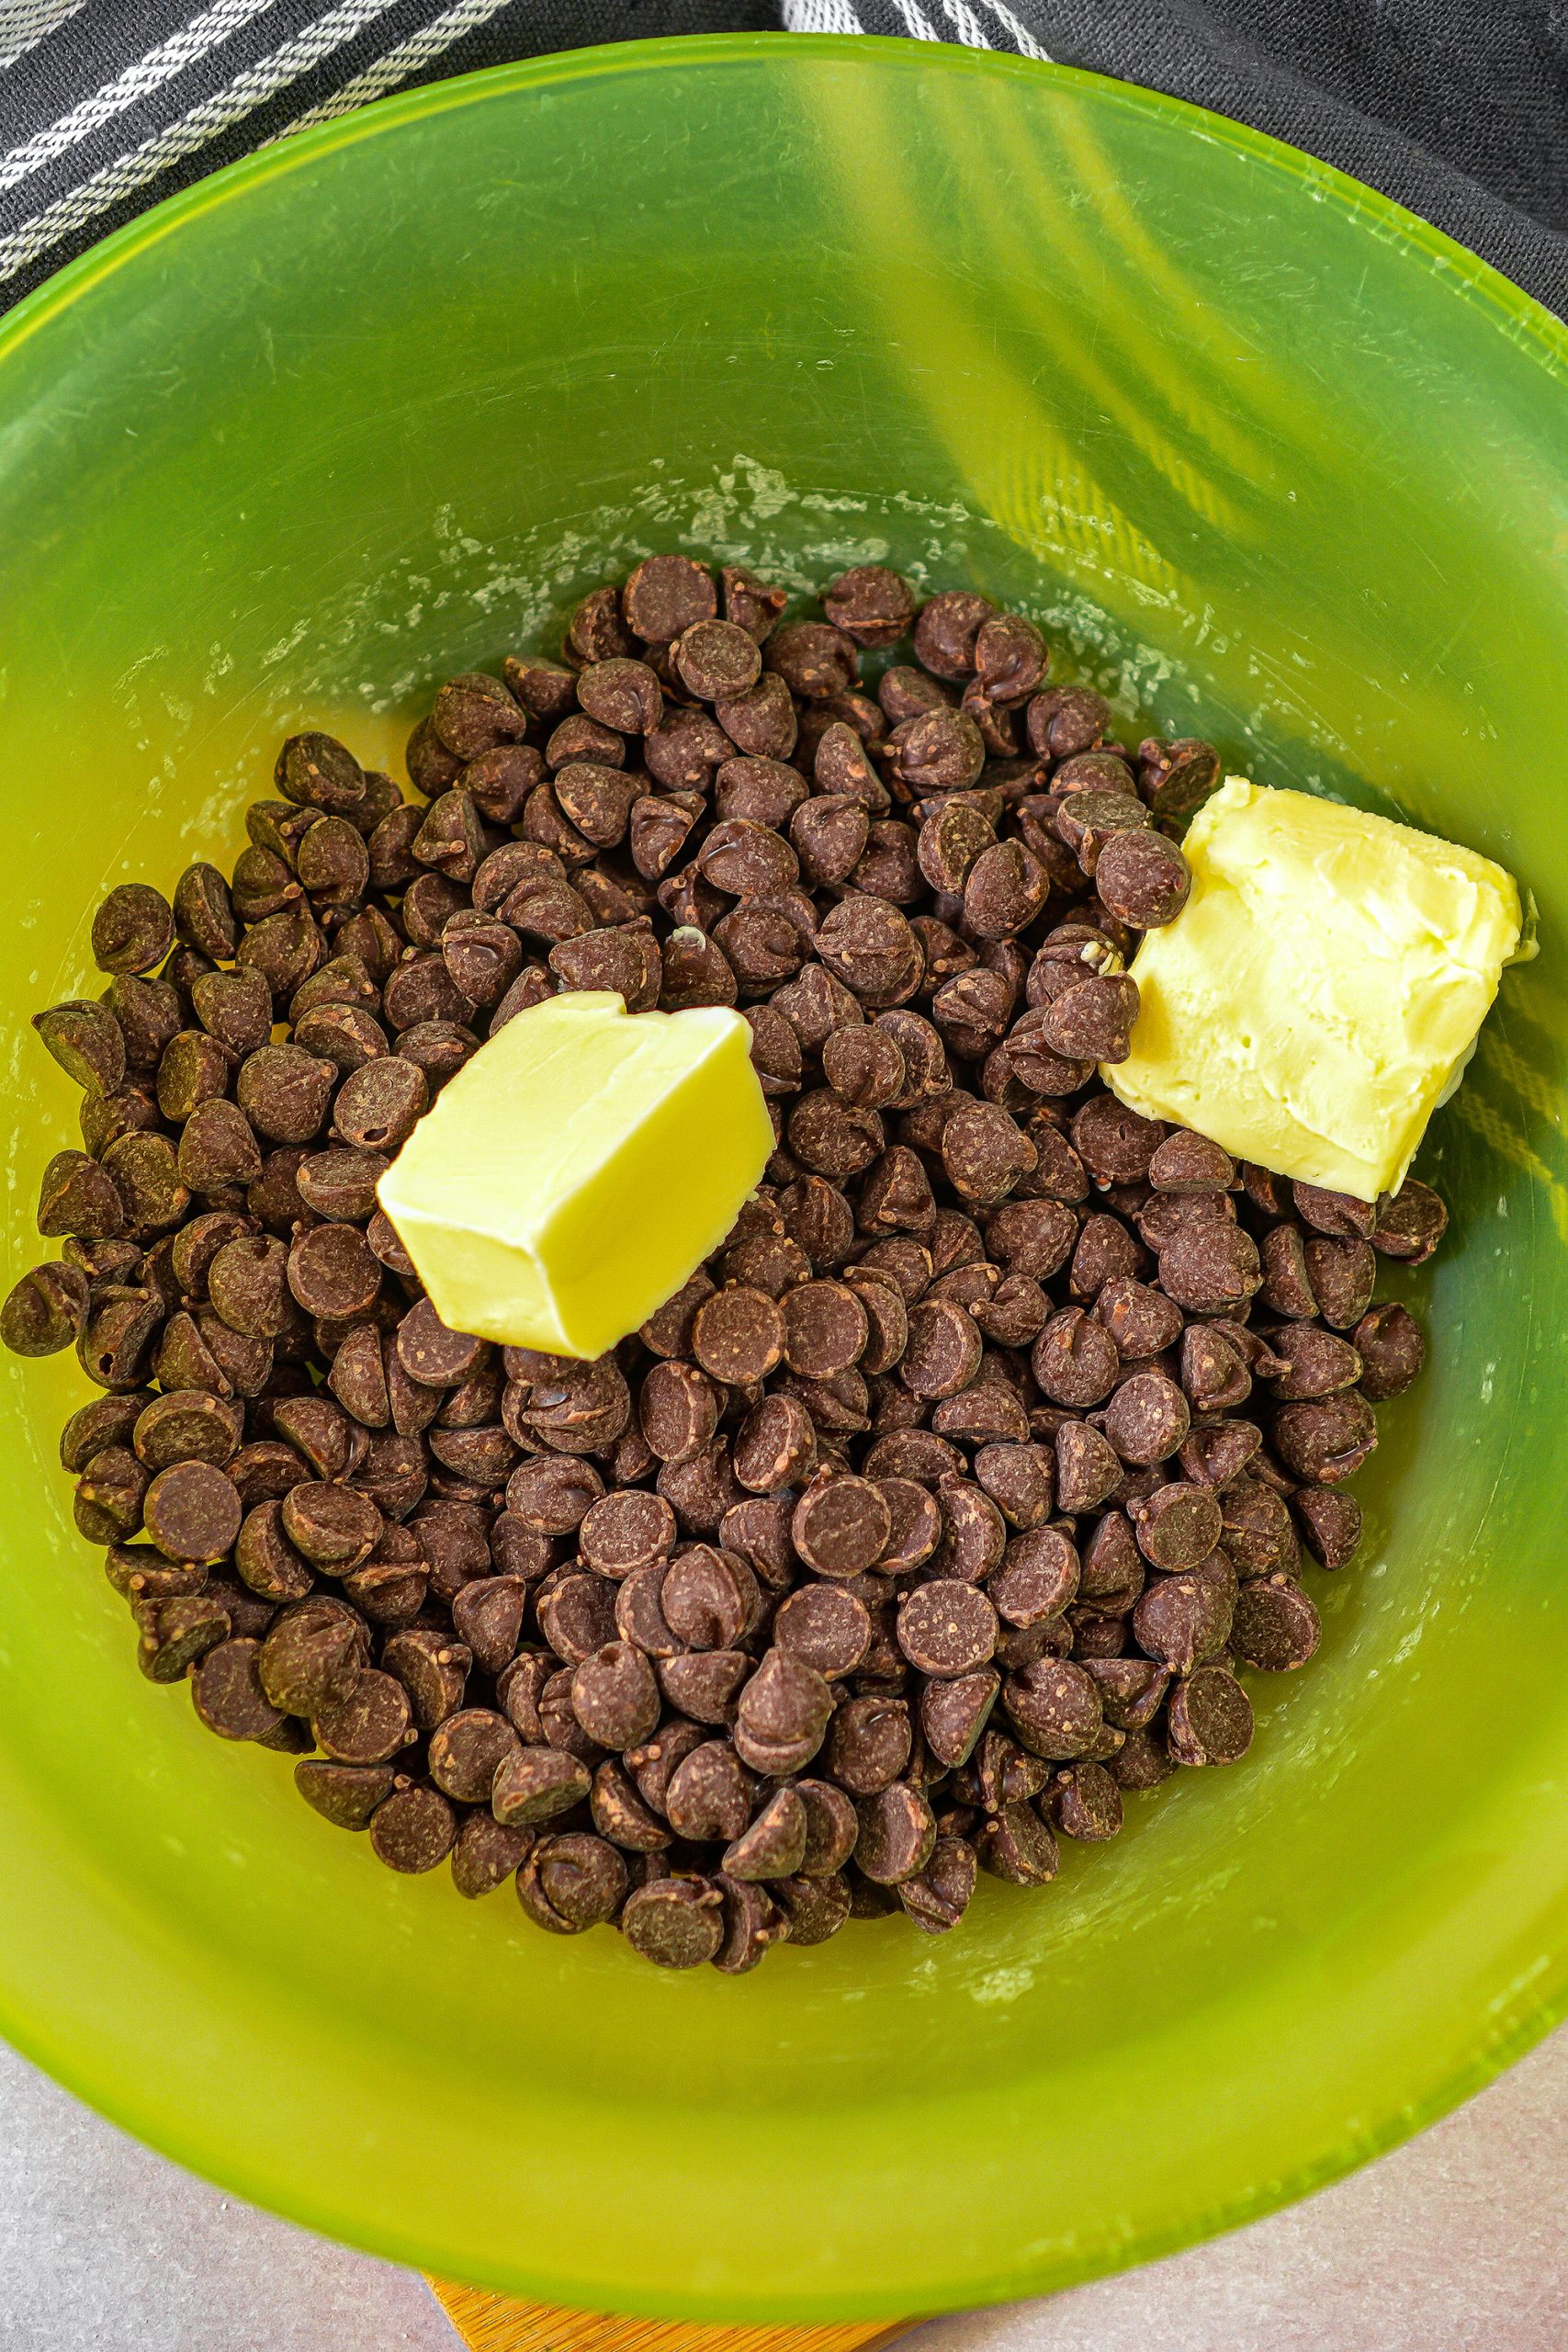 In a microwave safe bowl, combine the 2 tbsp butter and the 8 oz chocolate chips. 